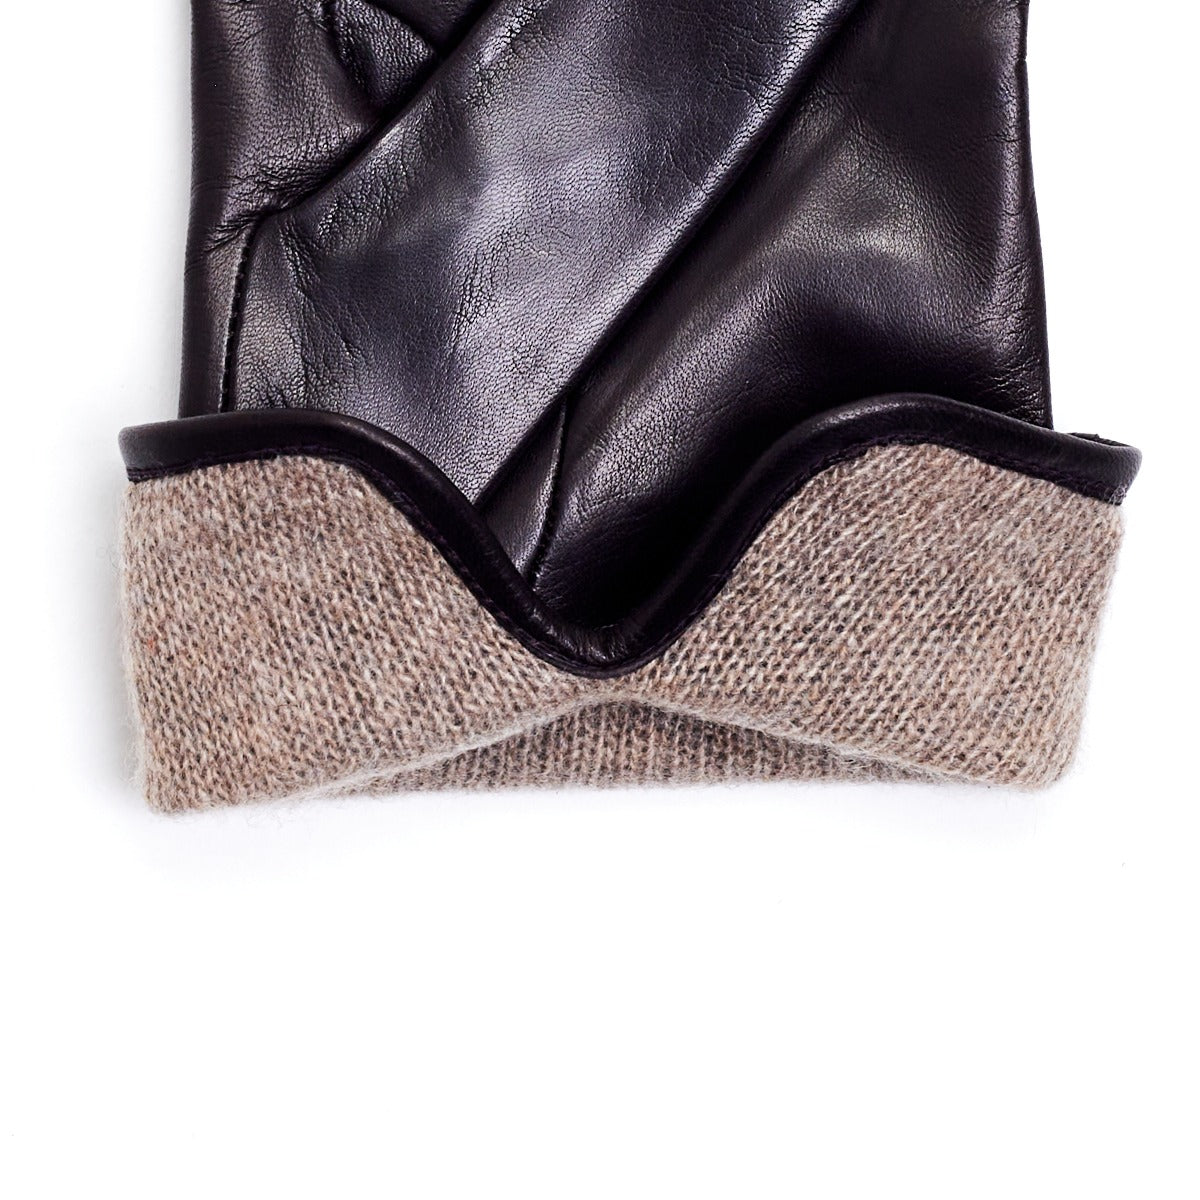 Sovereign Grade Dark Brown Nappa Leather Gloves, Cashmere Lined